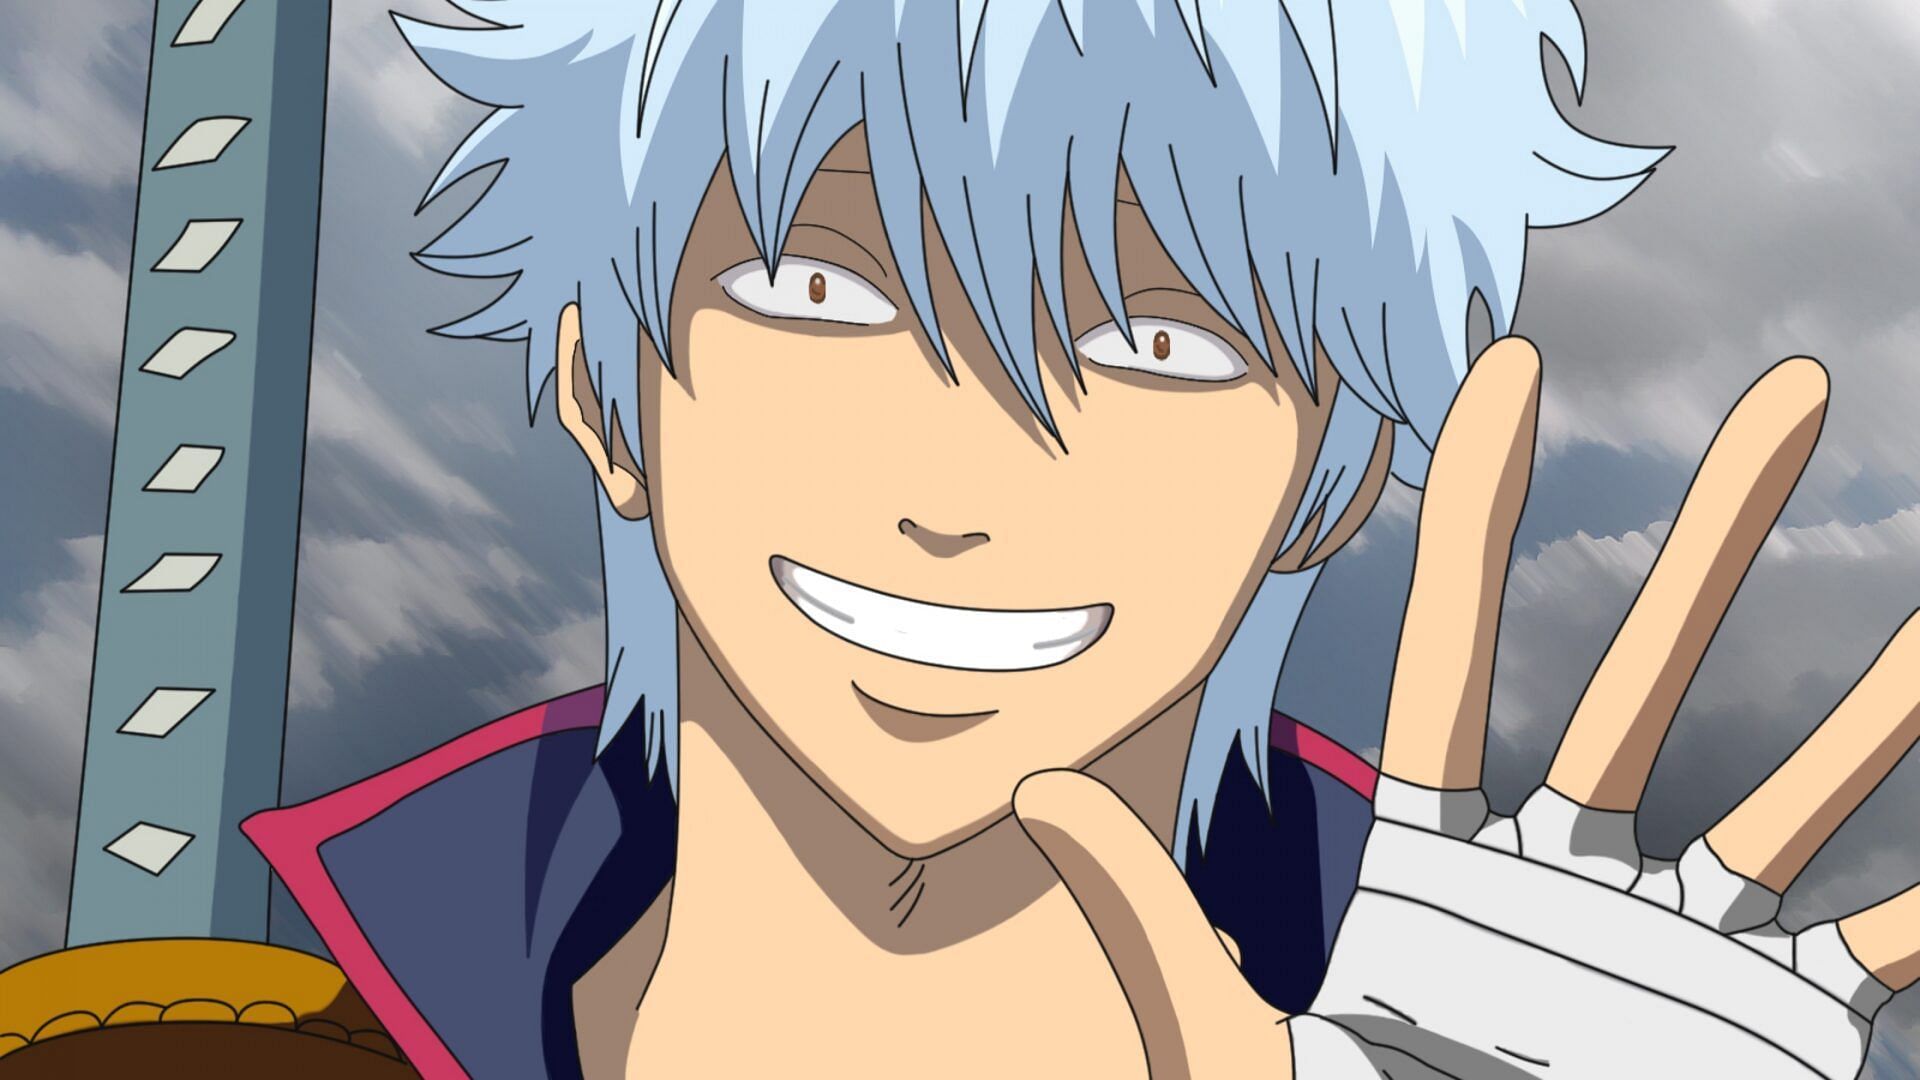 A still from Gintama featuring Gintoki, the protagonist of the anime show (Image via Bandai Namco Pictures)